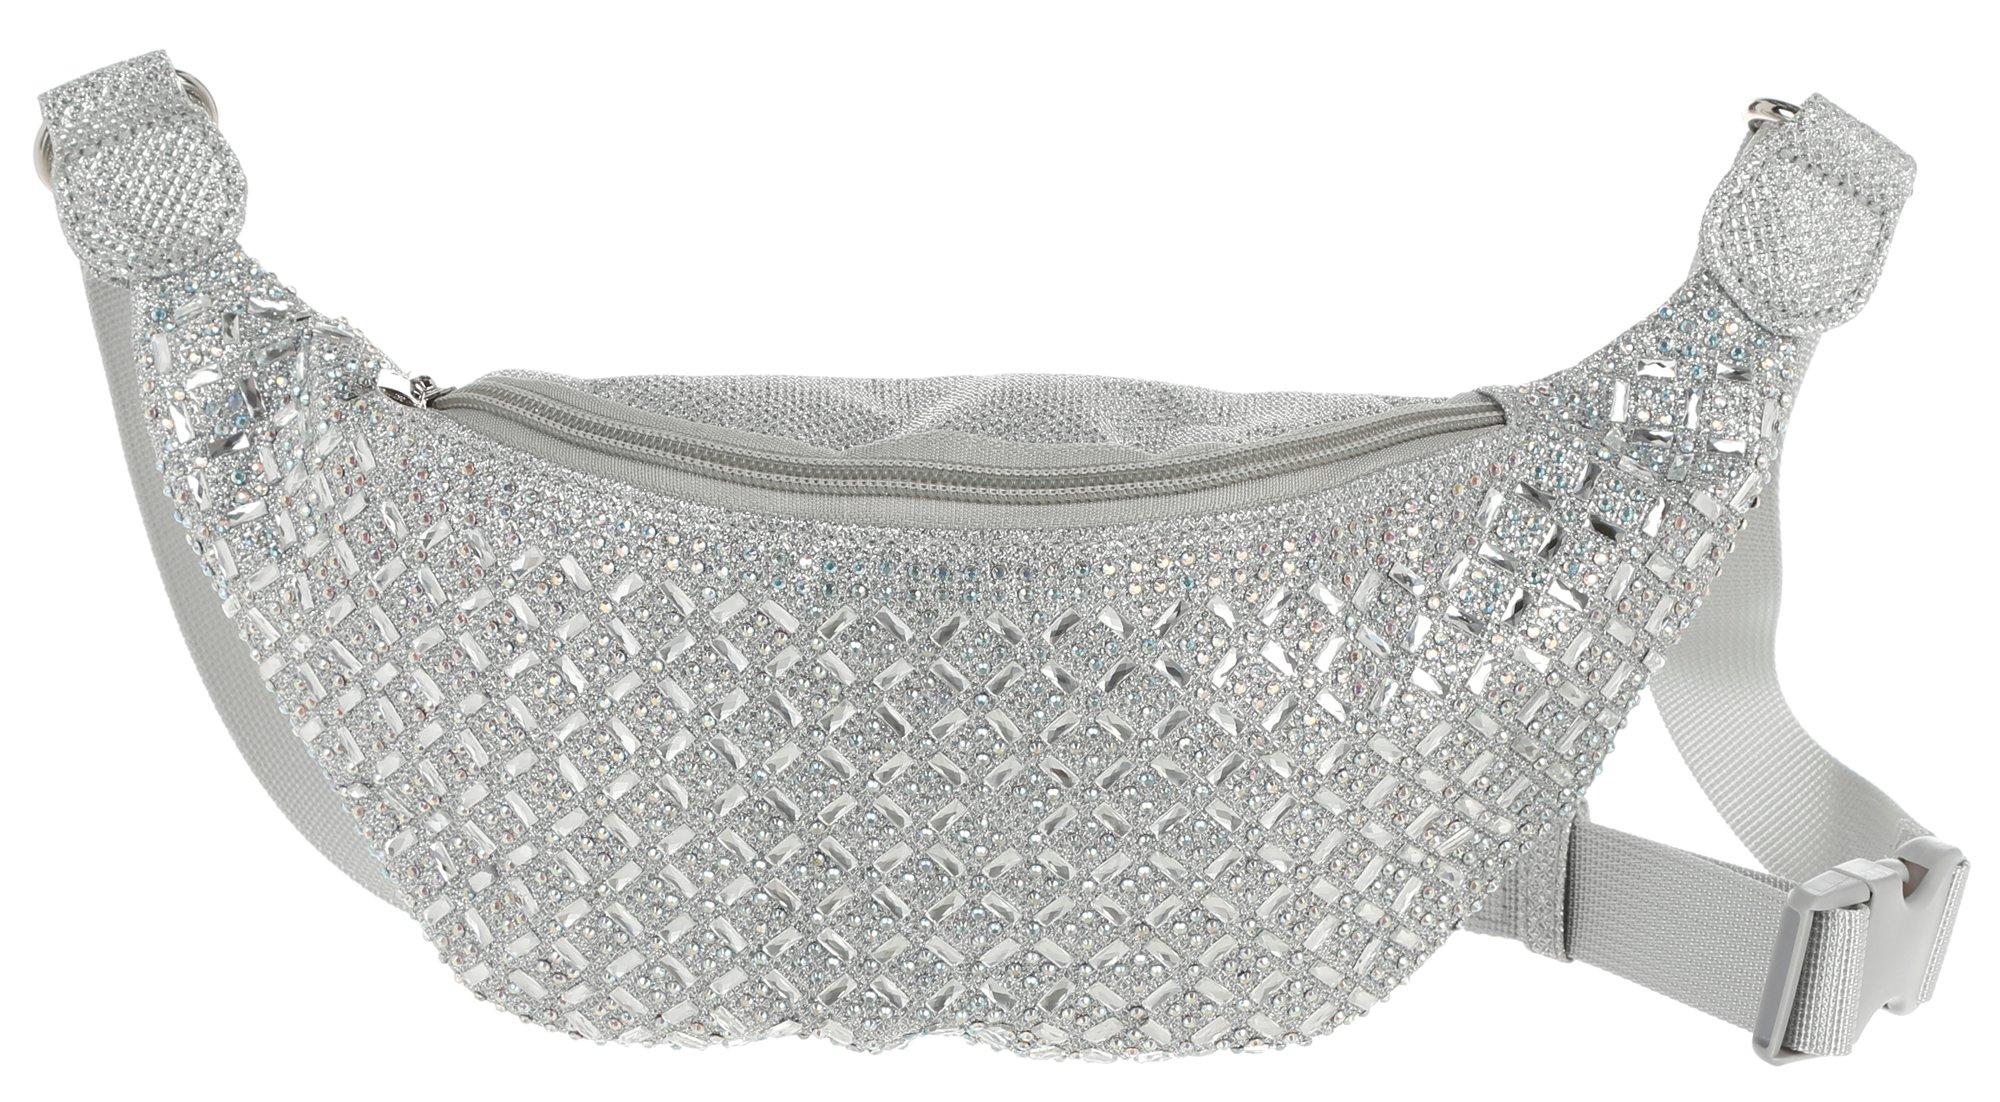 jeweled fanny pack